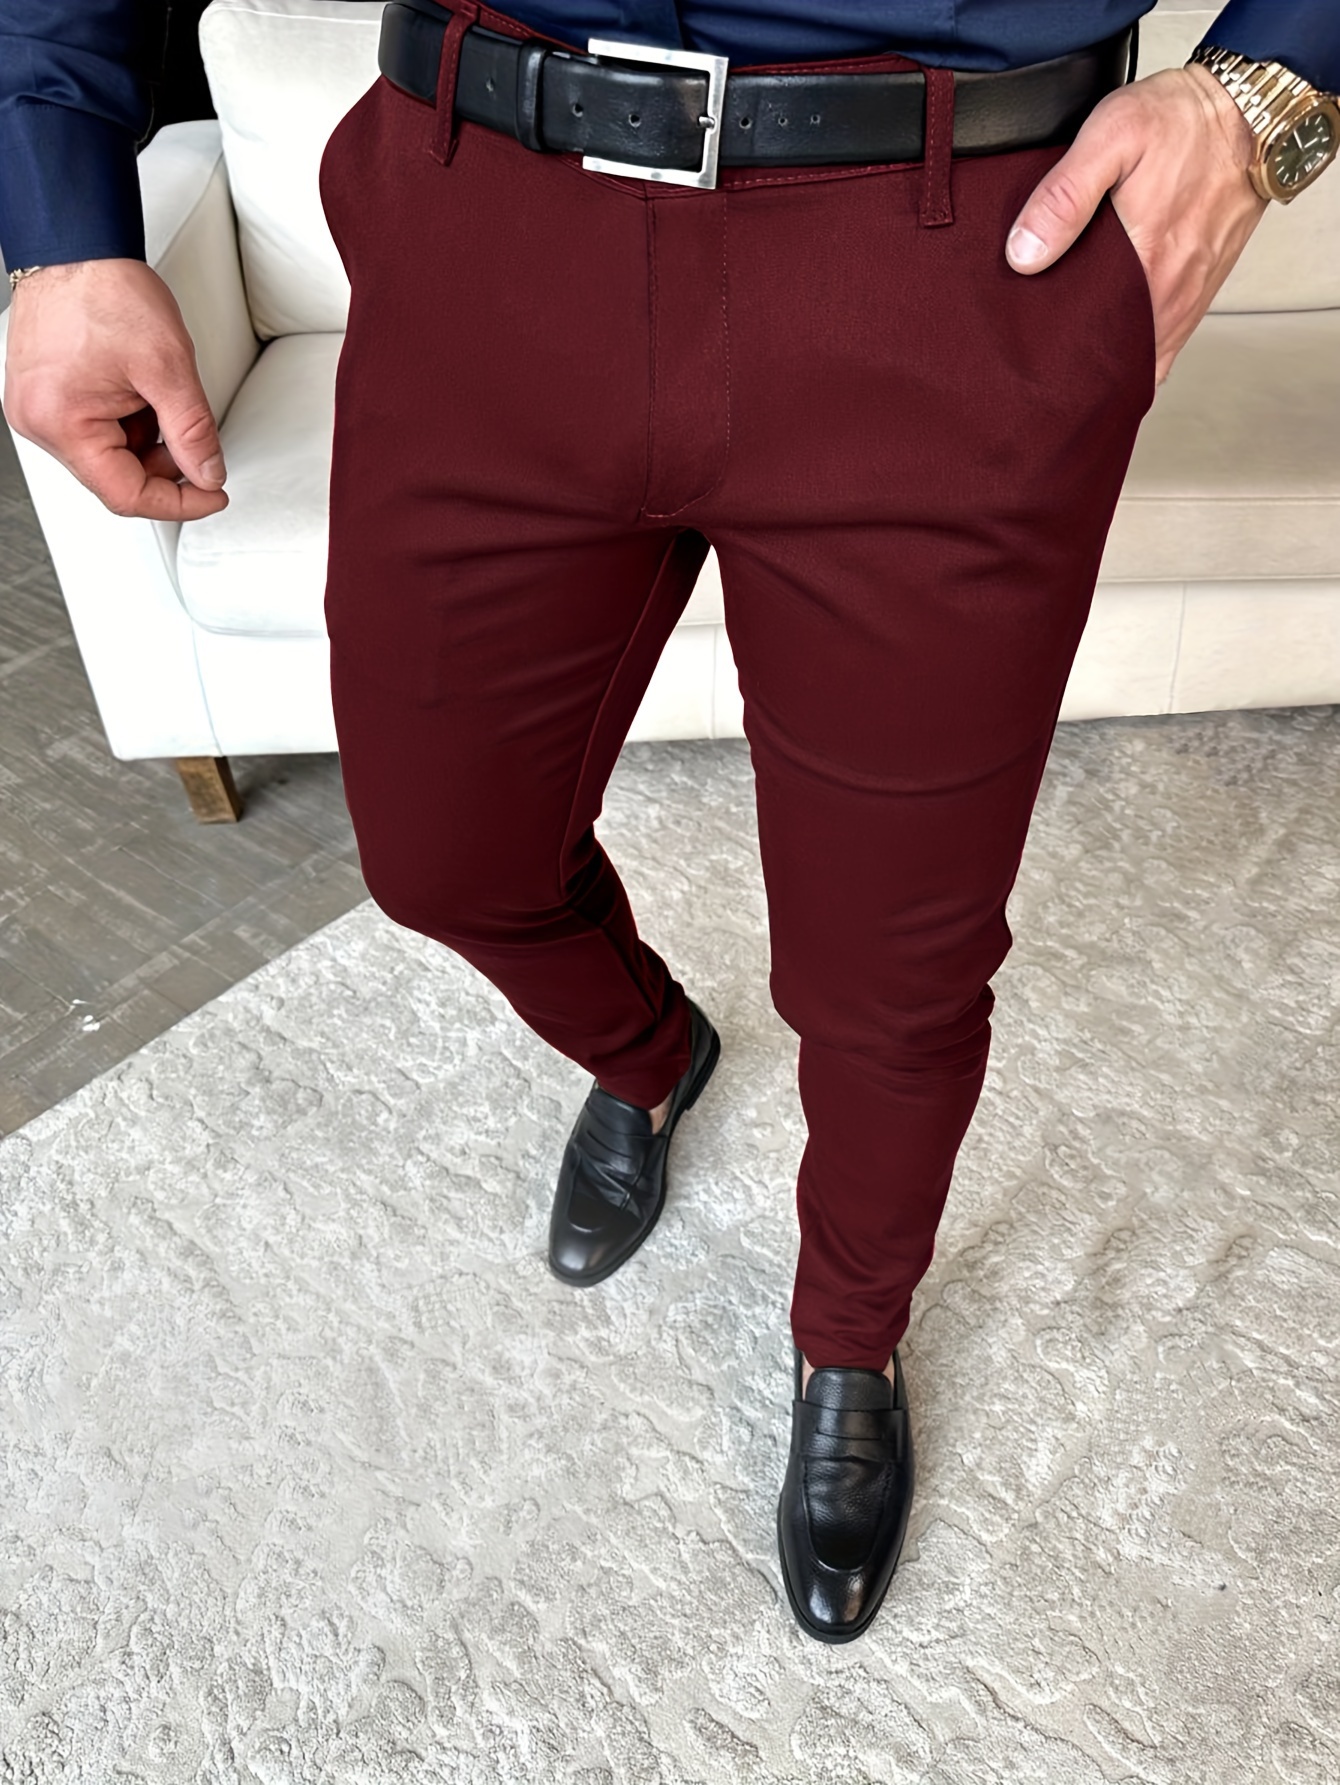 Semi-formal Classic Design Slim Fit Suit Trousers, Men's Pants For Spring  Summer Business Occasion